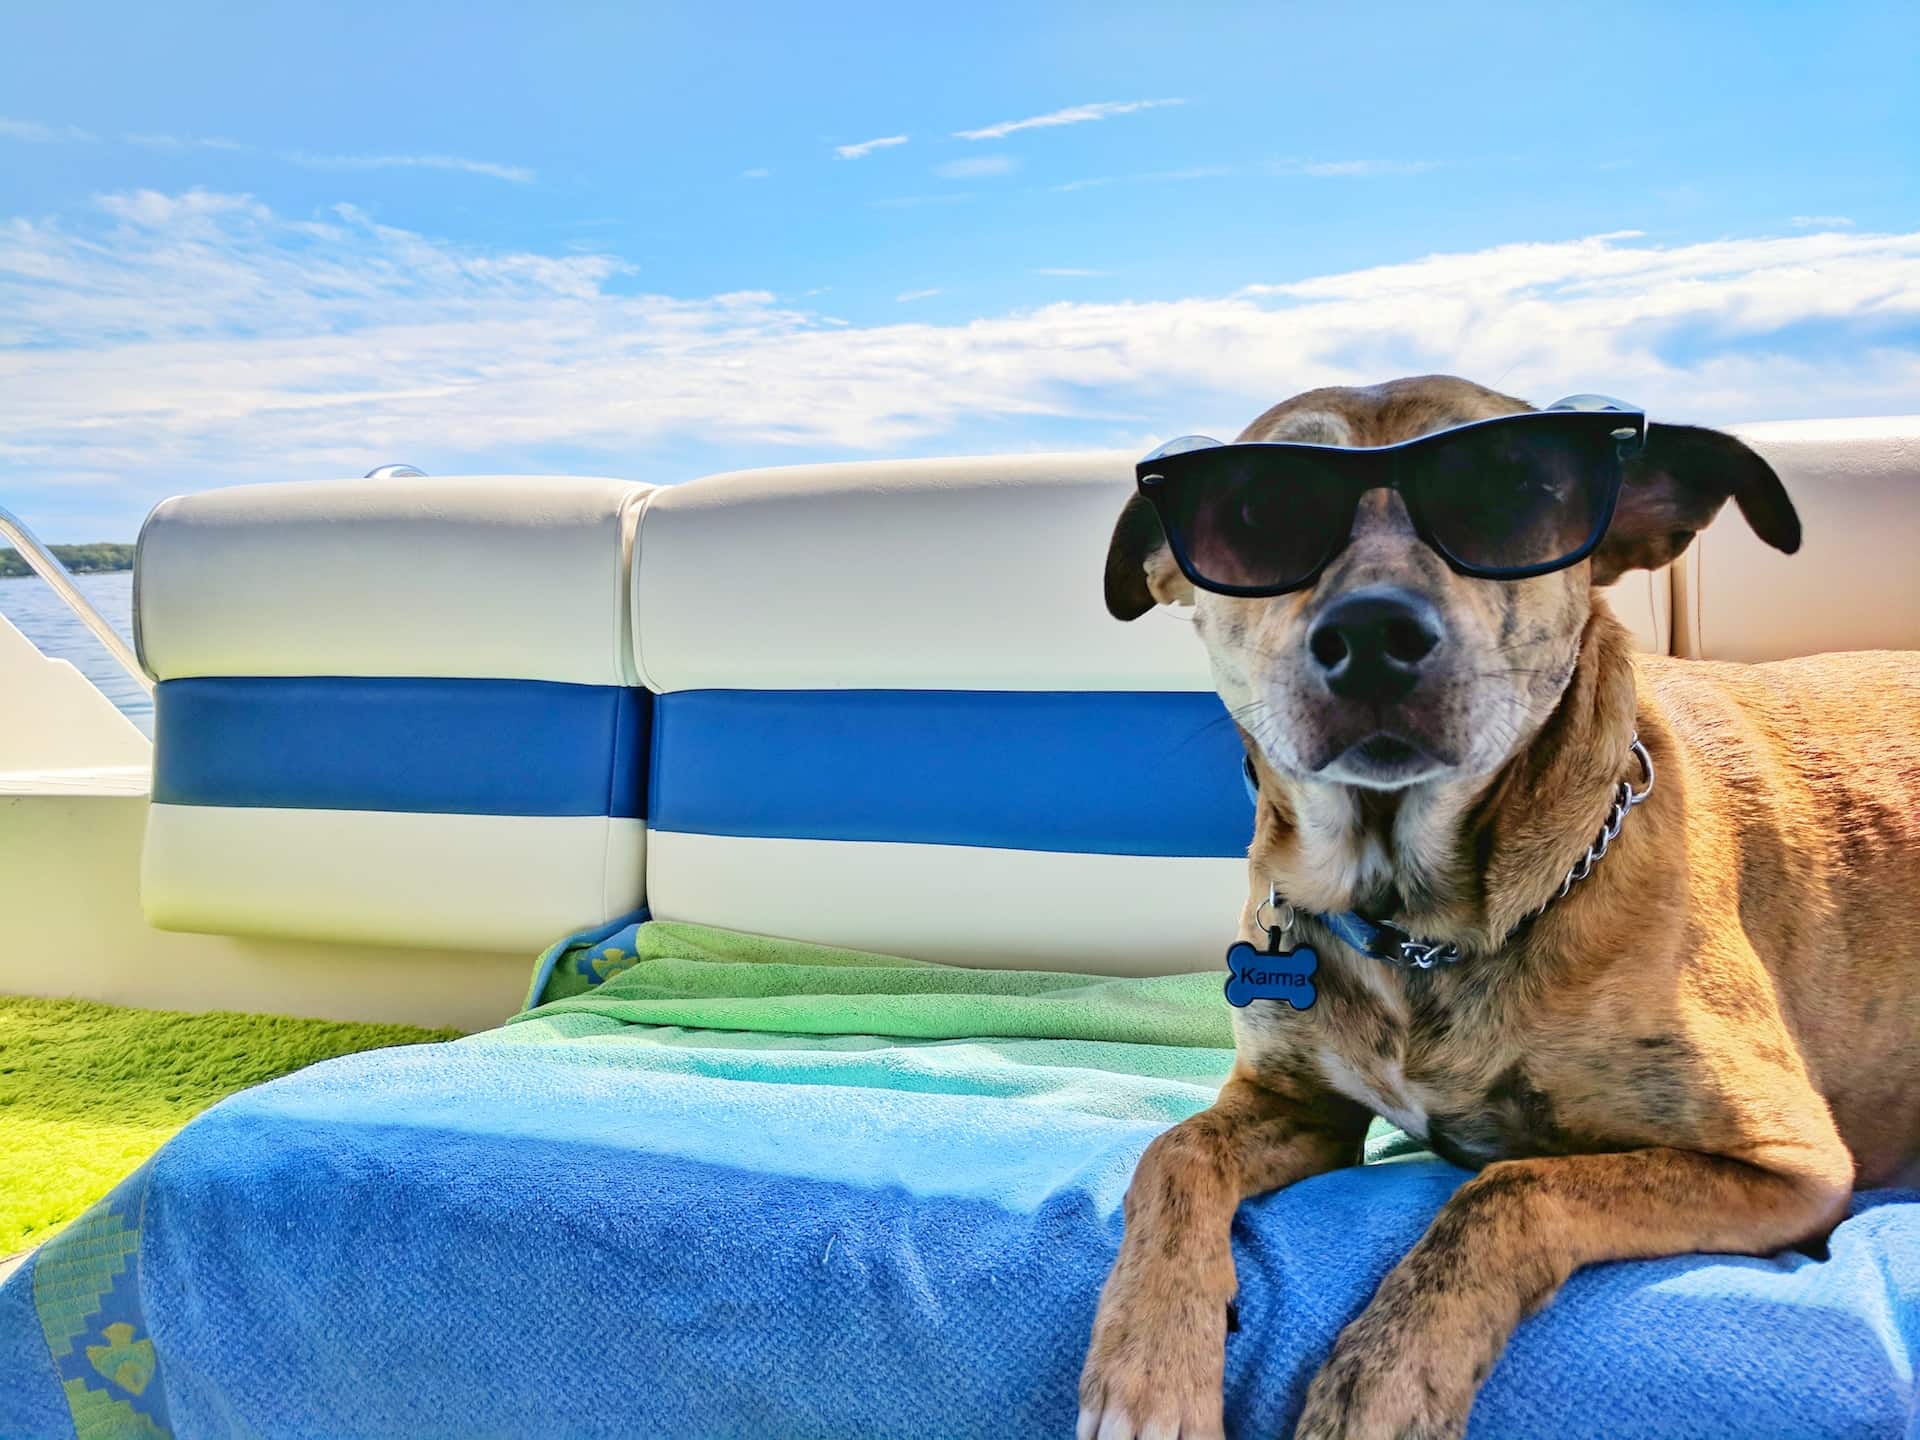 The Best Dog-Friendly Vacations For You and Your Pup